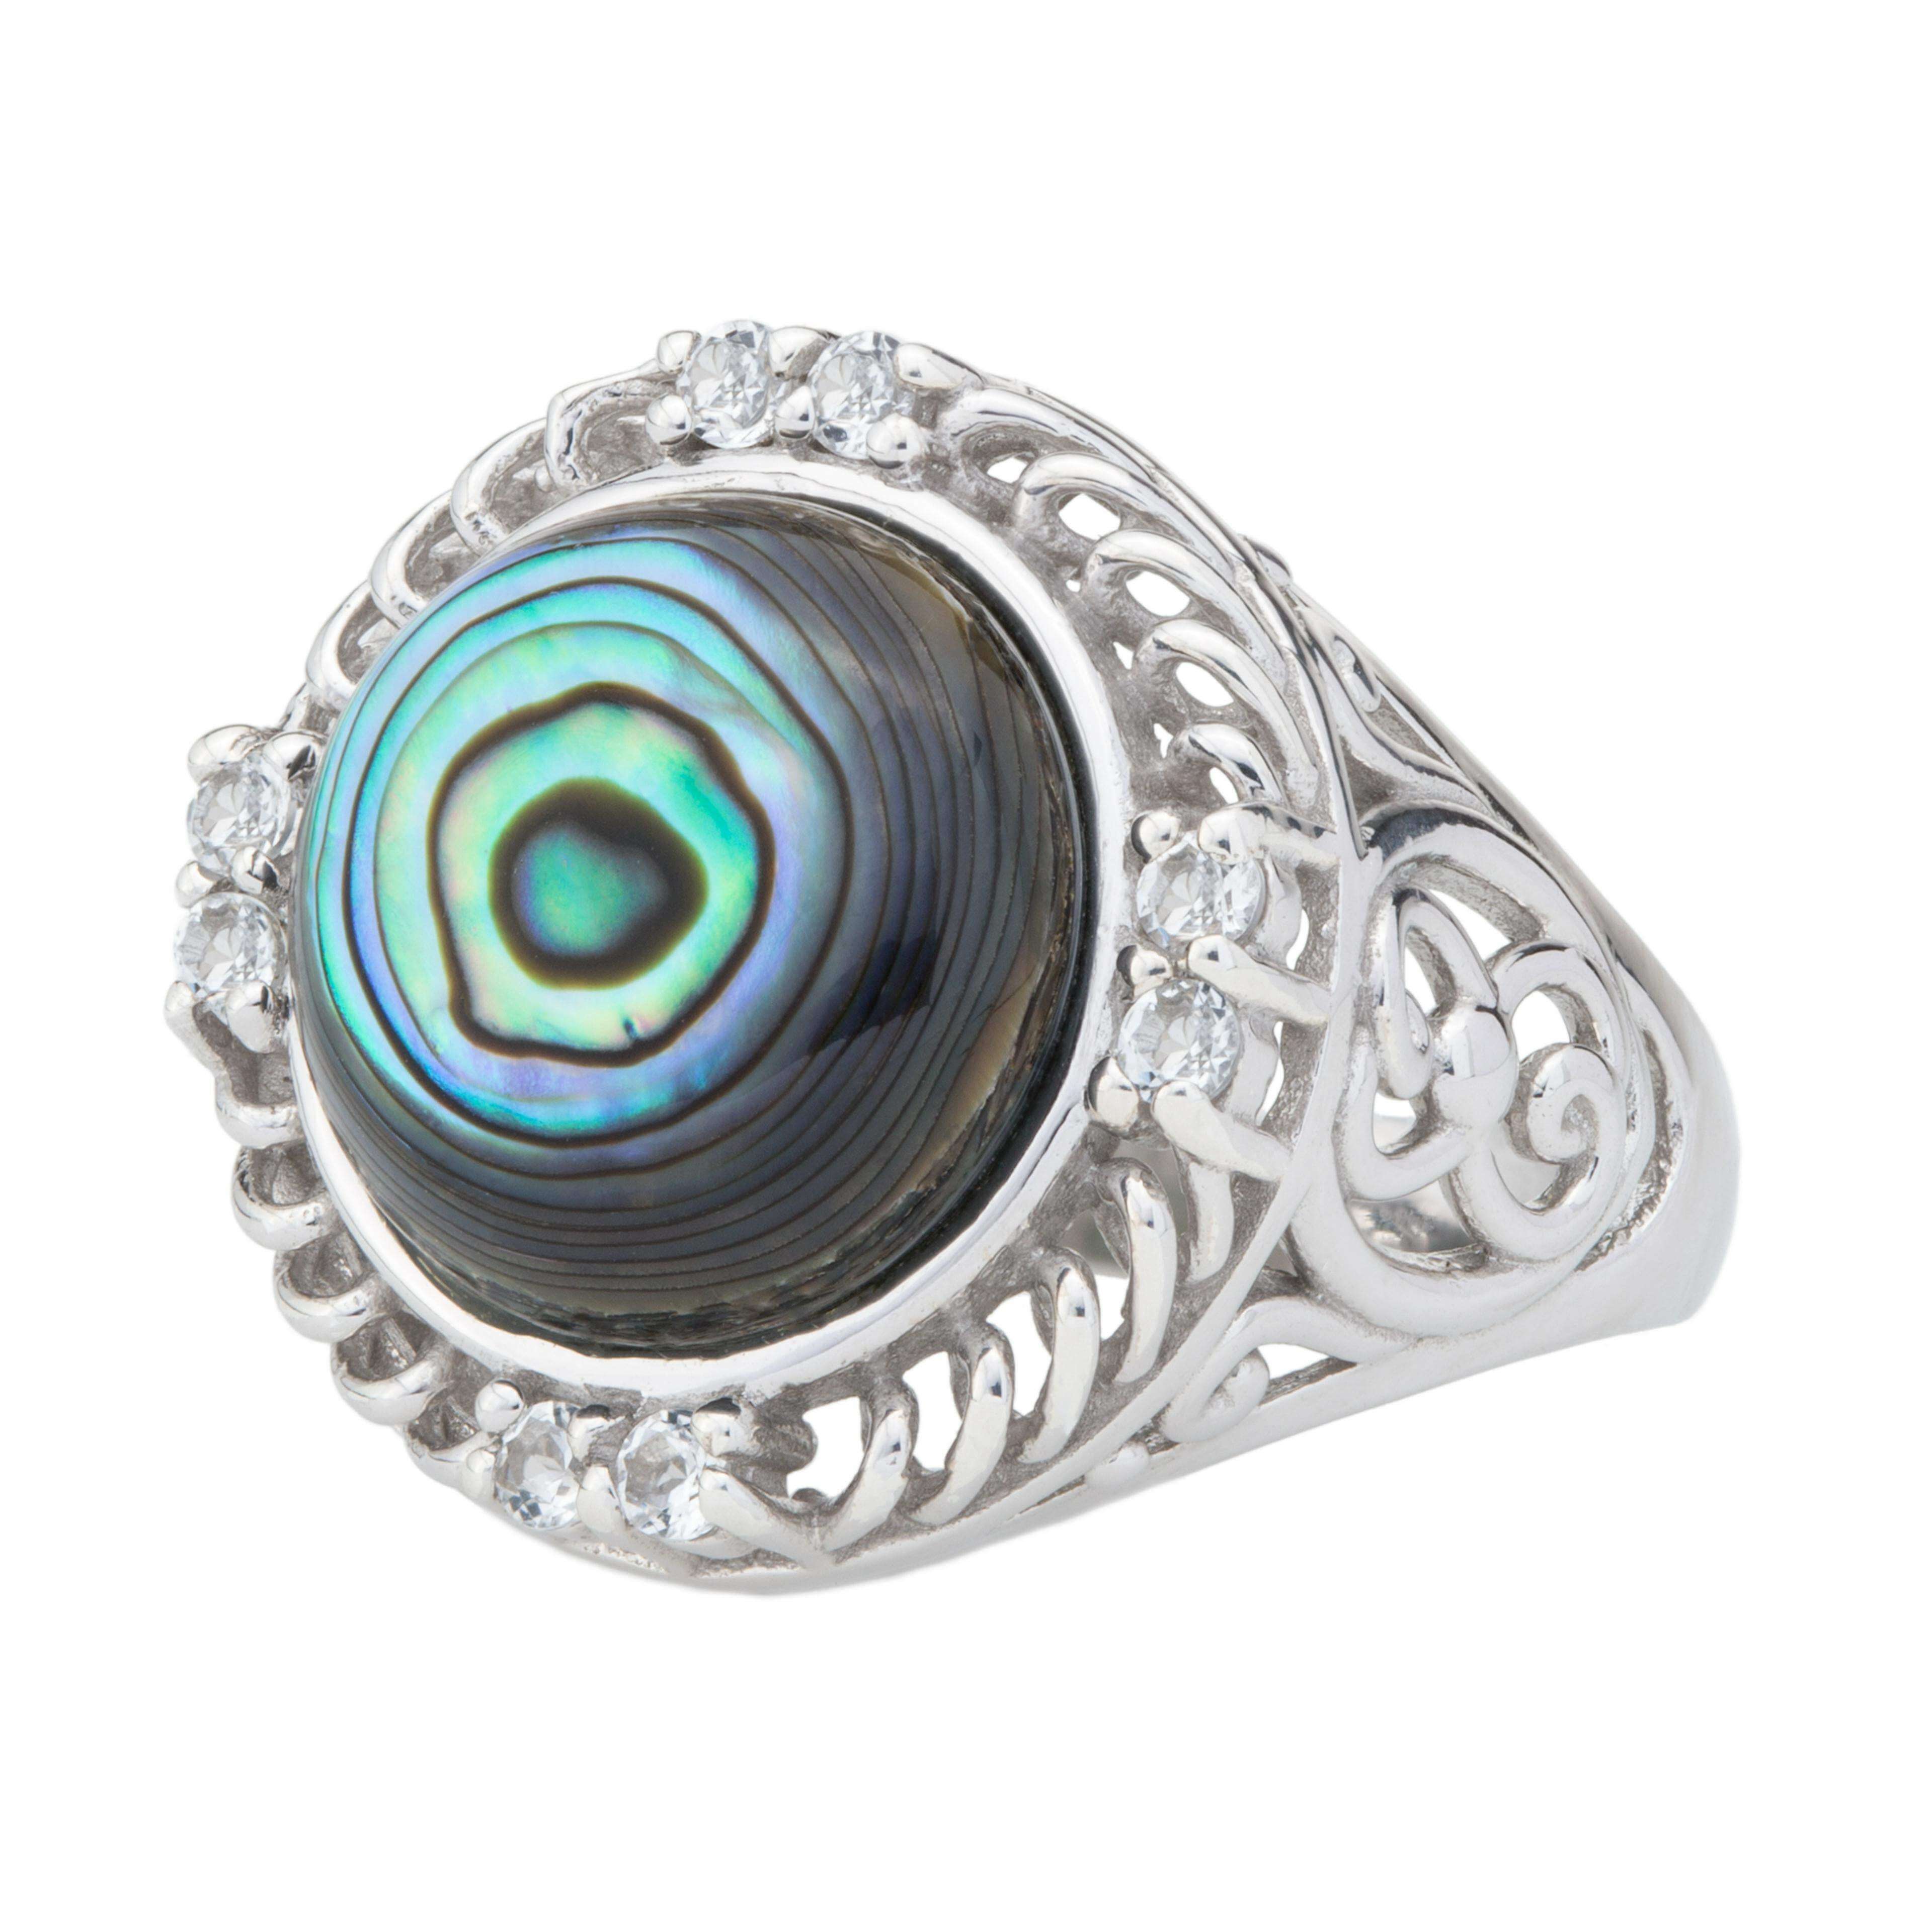 Silver Abalone & White Topaz Textured Ring Size 7 - Shop Thrifty Treasures